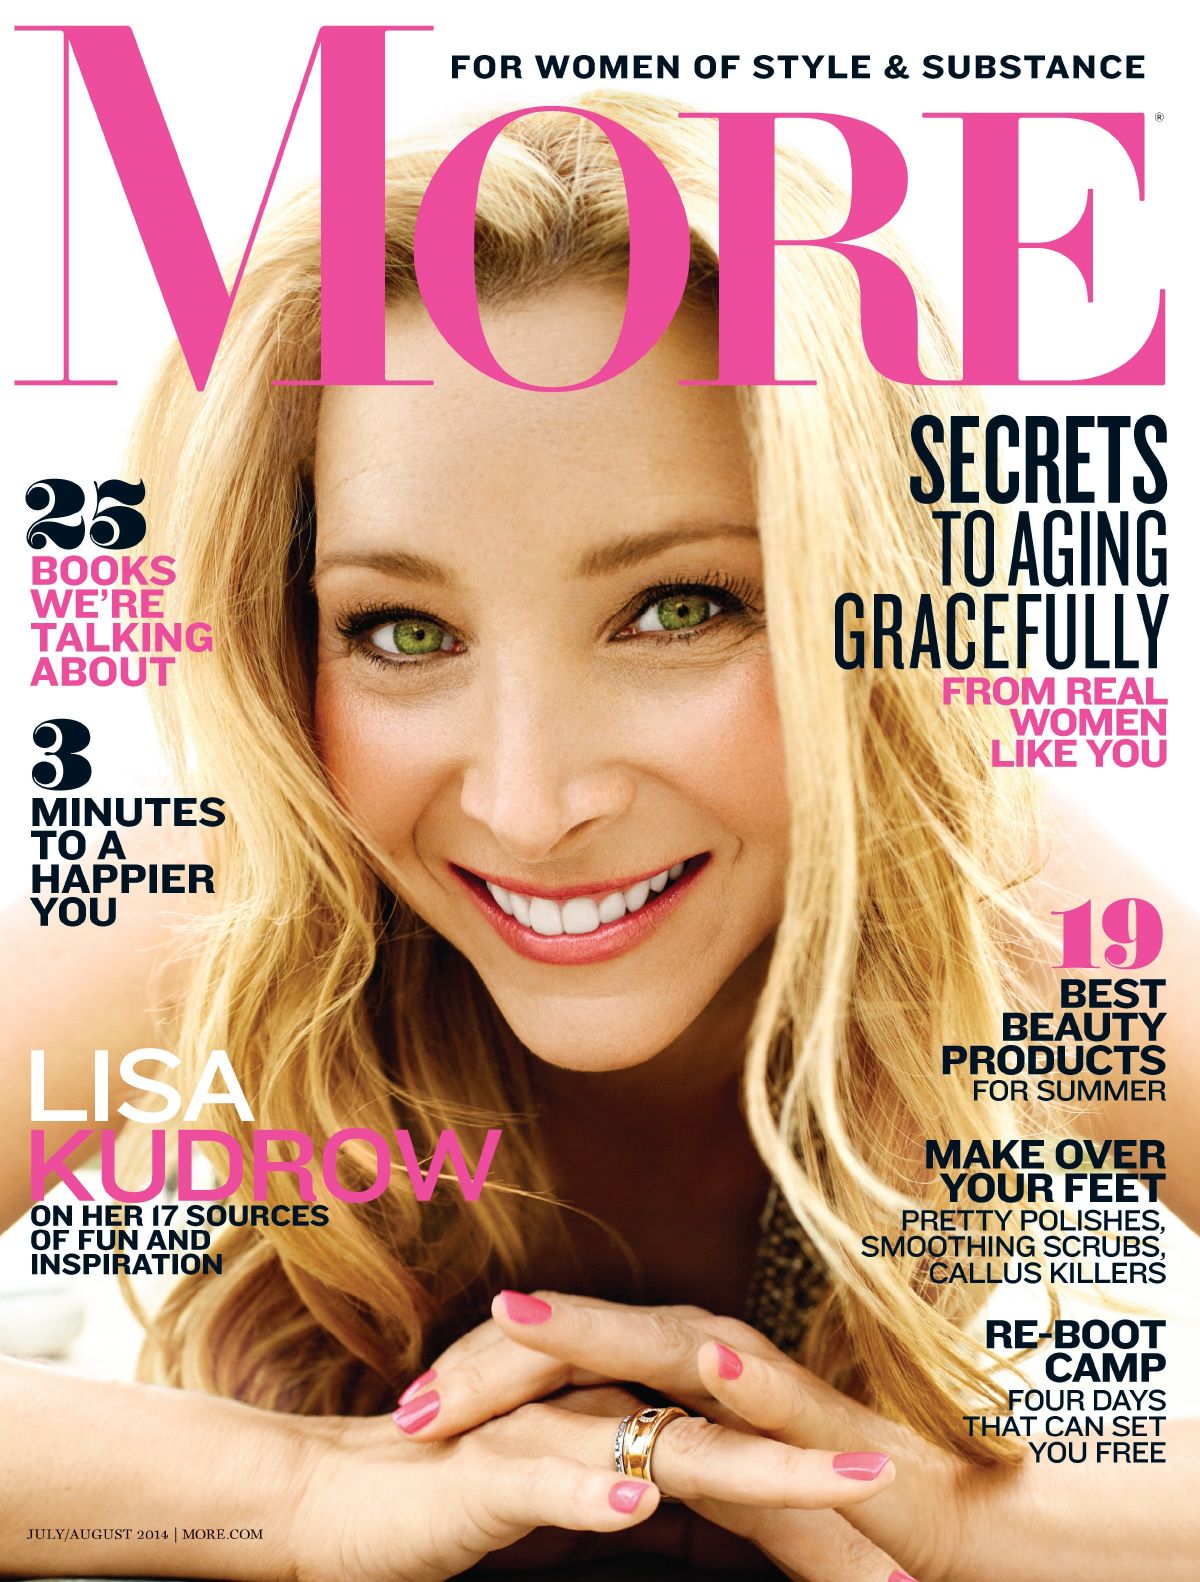 LISA KUDROW in More Magazine, July/August 2014 Issue - lisa-kudrow-in-more-magazine-july-august-2014-issue_1